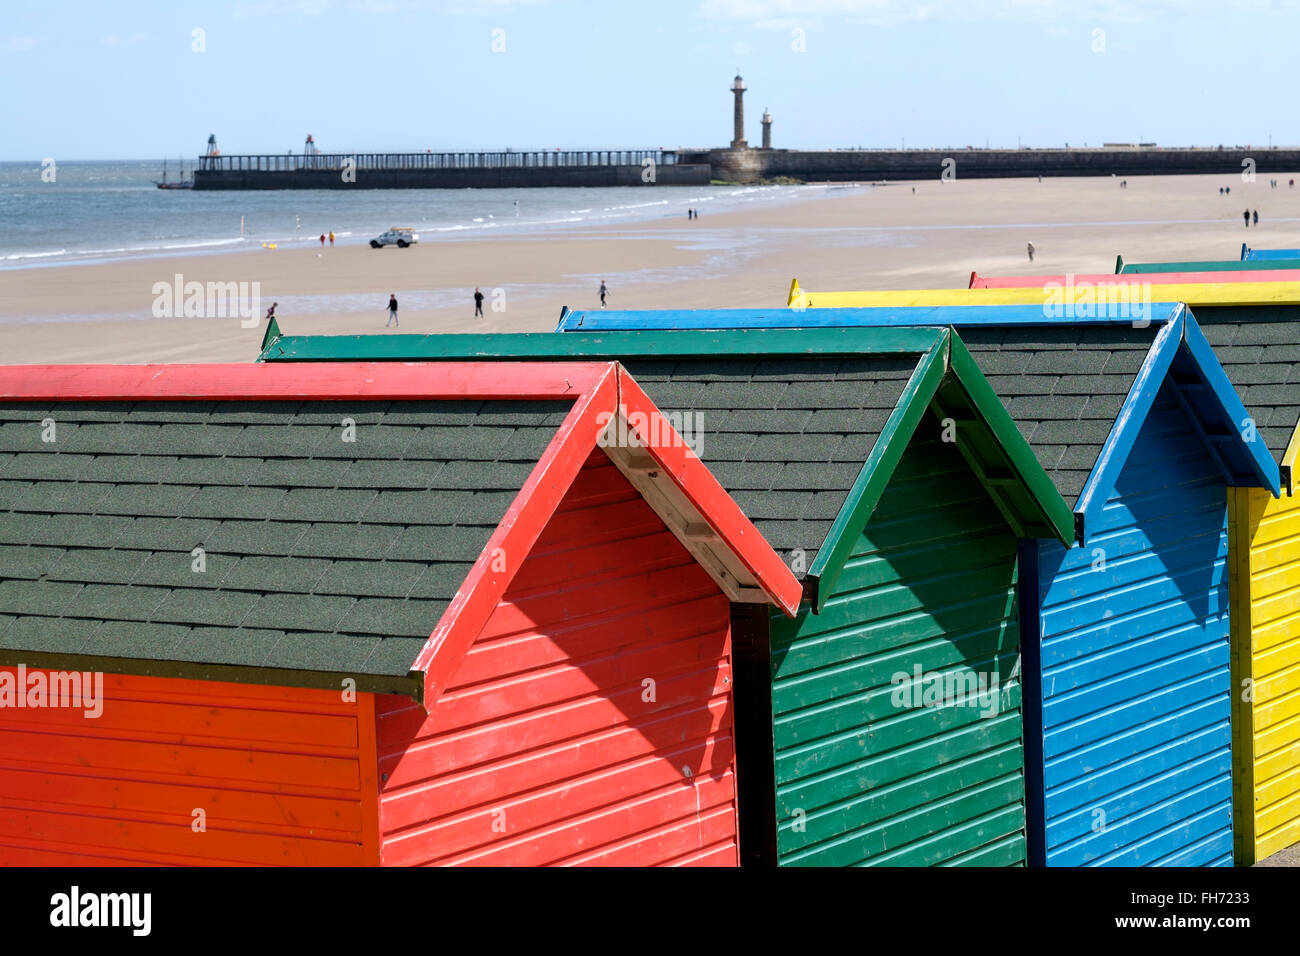 The North sea and West Pier from the Cliff beach huts, Whitby, North Yorkshire, England Stock Photo